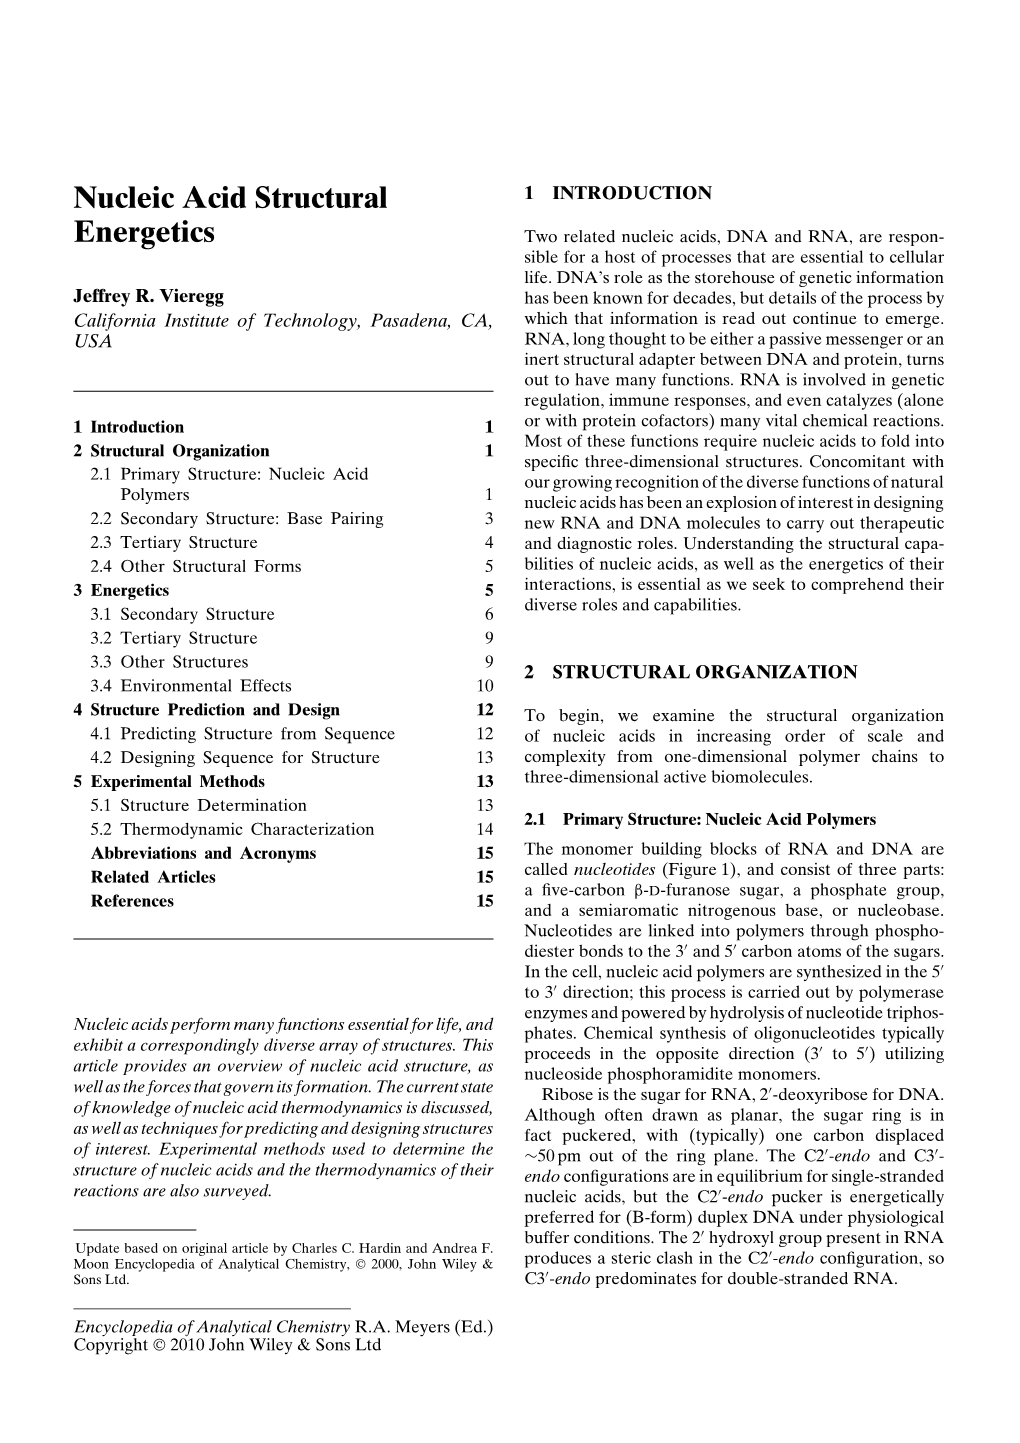 "Nucleic Acid Structural Energetics" In: Encyclopedia of Analytical